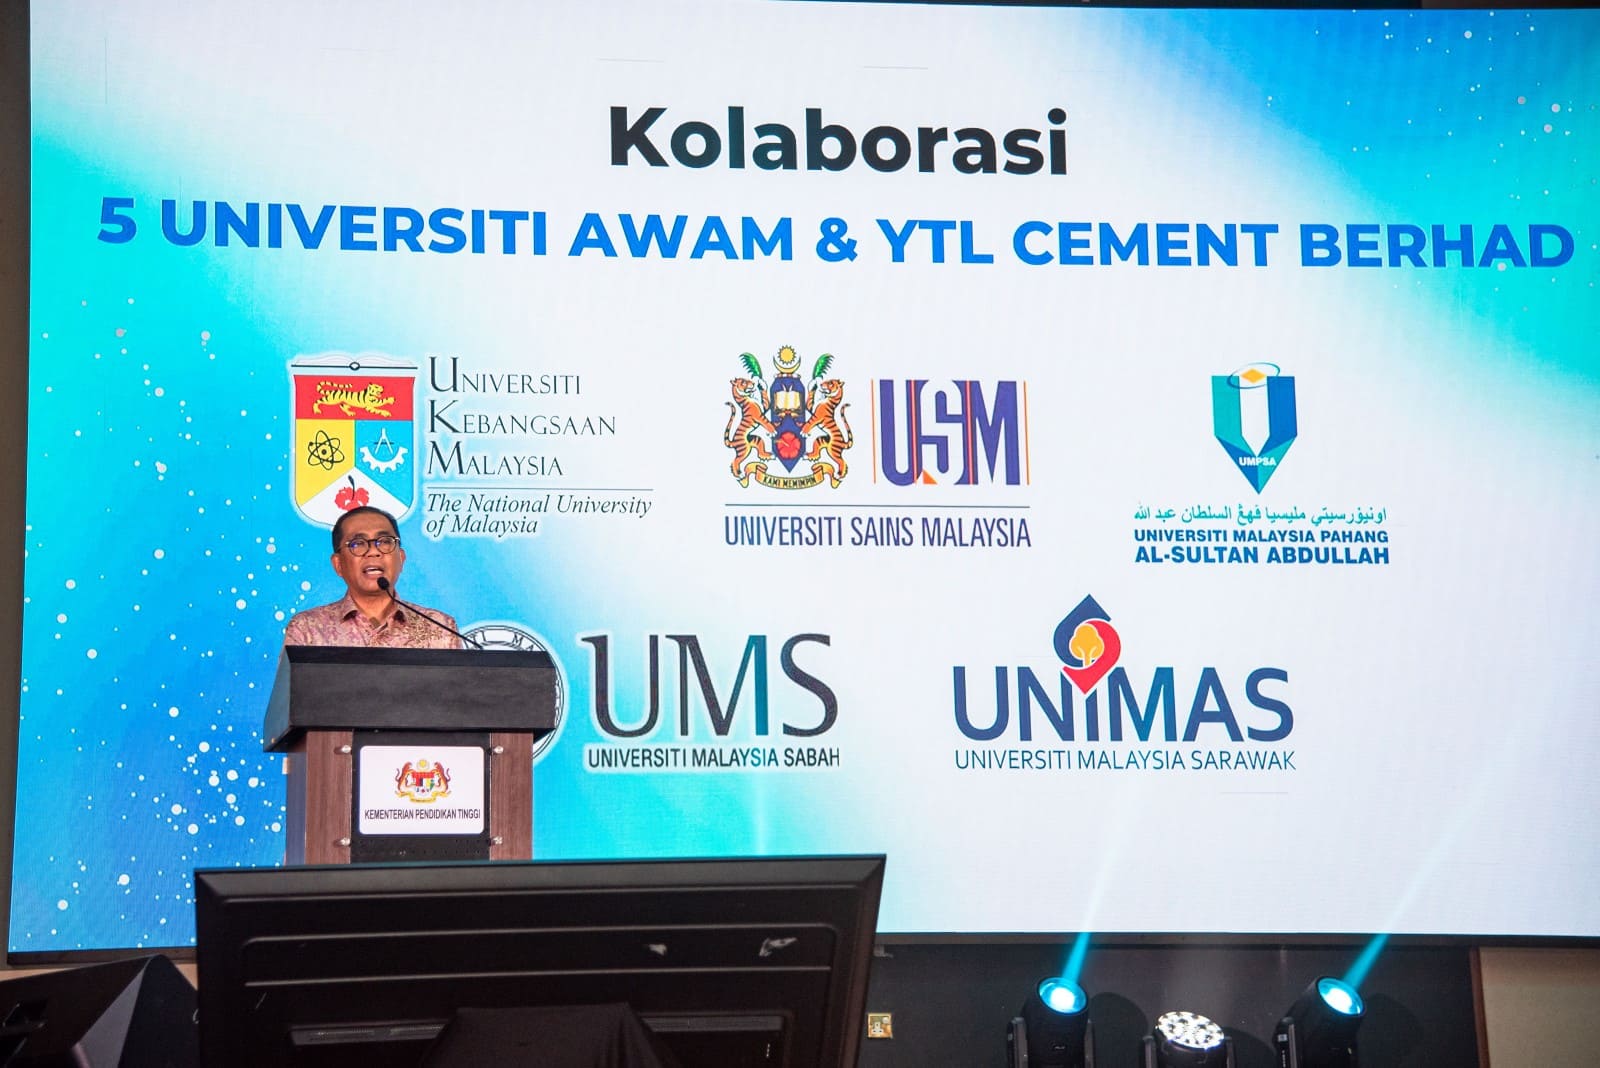 Malaysia’s First University-Industry Research Consortium Launched by YTL Cement and Ministry of Higher Education, for Research on Sustainability of Tropical Limestone Karst